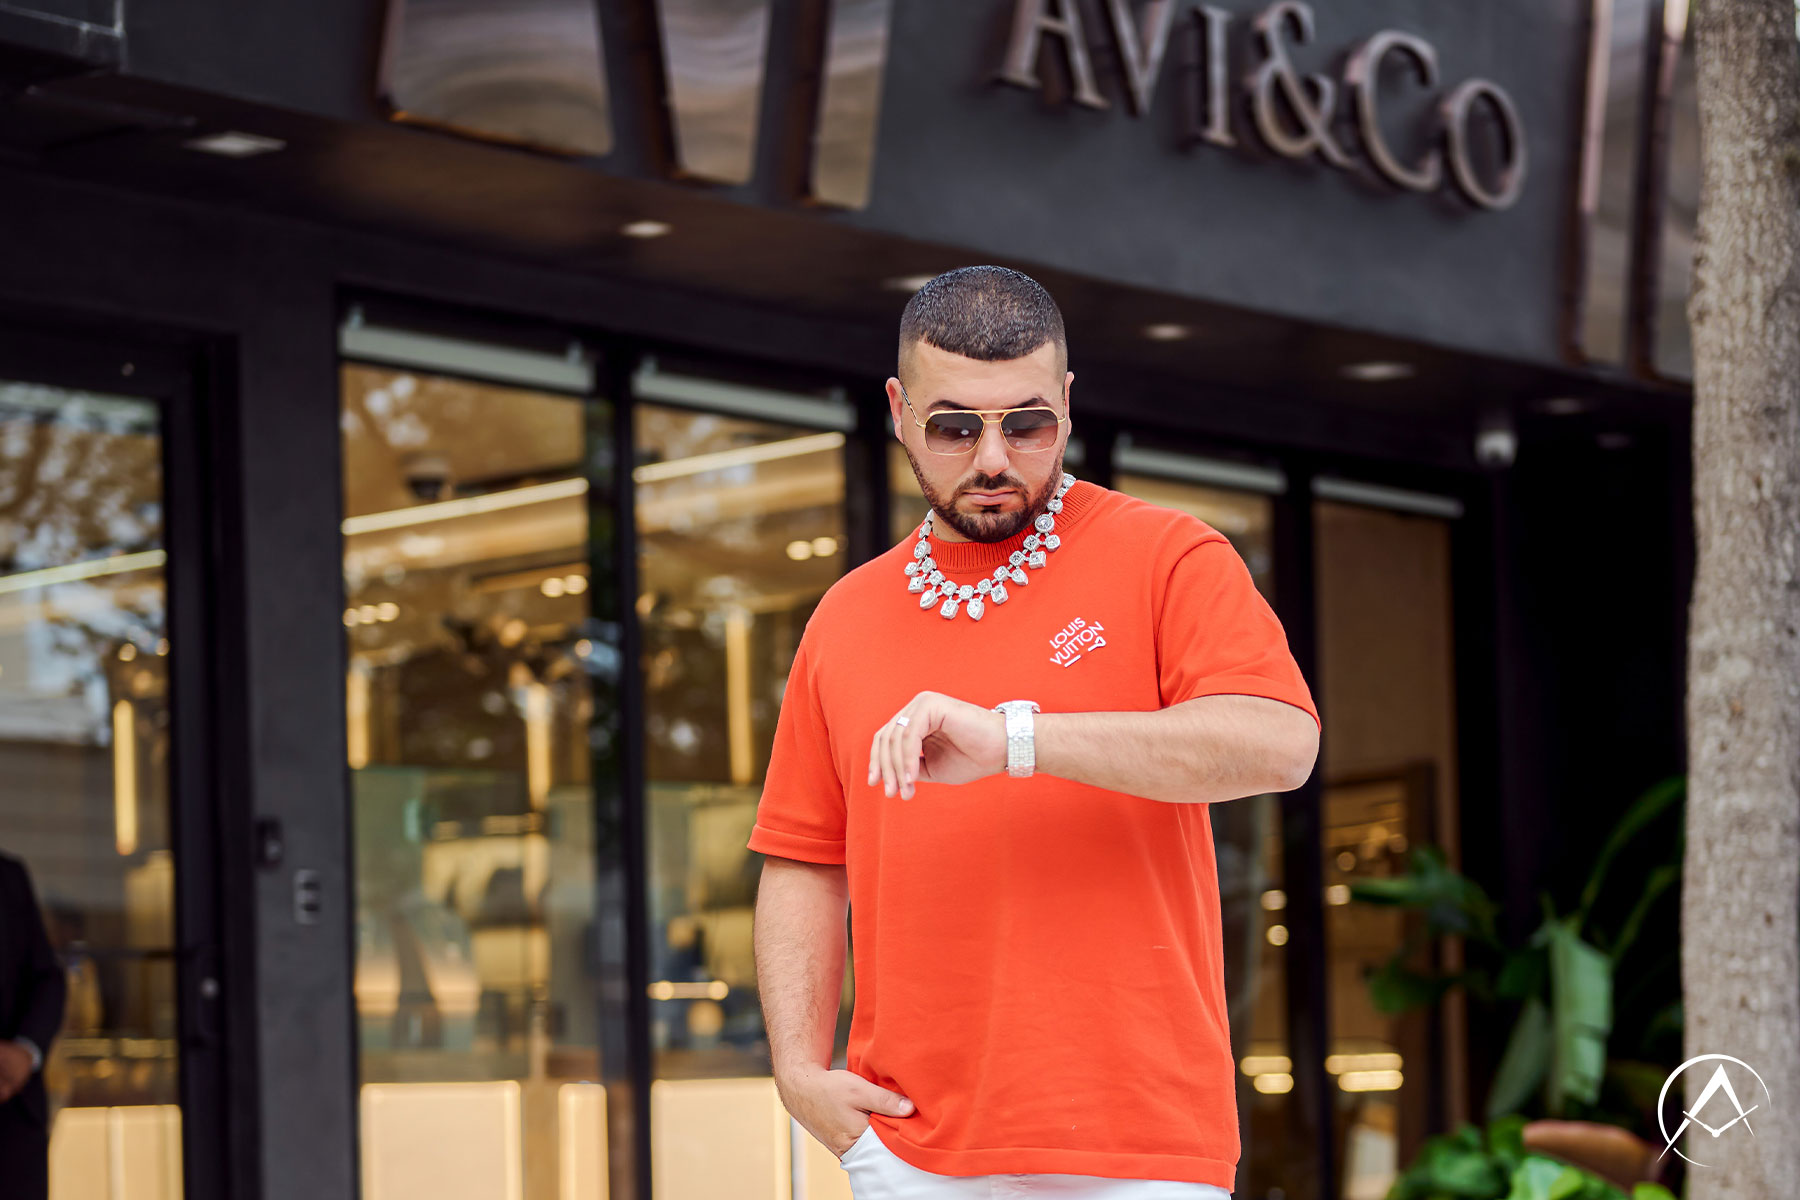 Man Wears Louis Vuitton Orange Shirt, White Pants, and Orange Sneakers with Diamond Watch and Necklace in Front of Avi & Co.’s Miami Boutique.